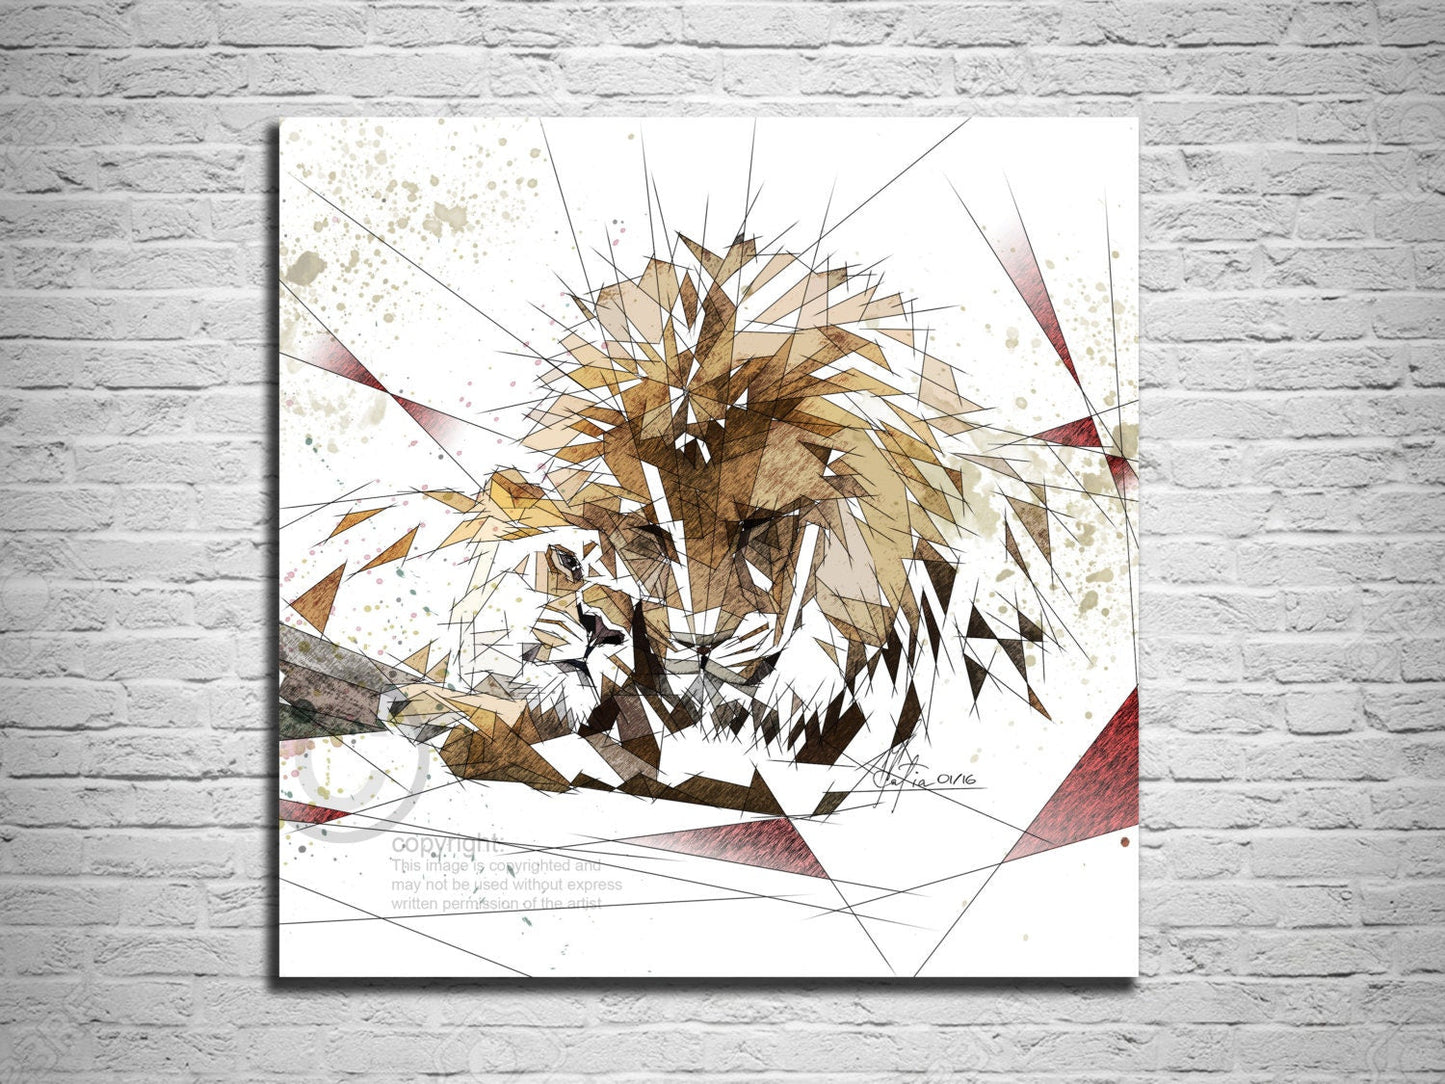 CANVAS PRINT Wild Love Lions Art Print , Contemporary Abstract Drawing, Animals Modern Art ZOO-LL01